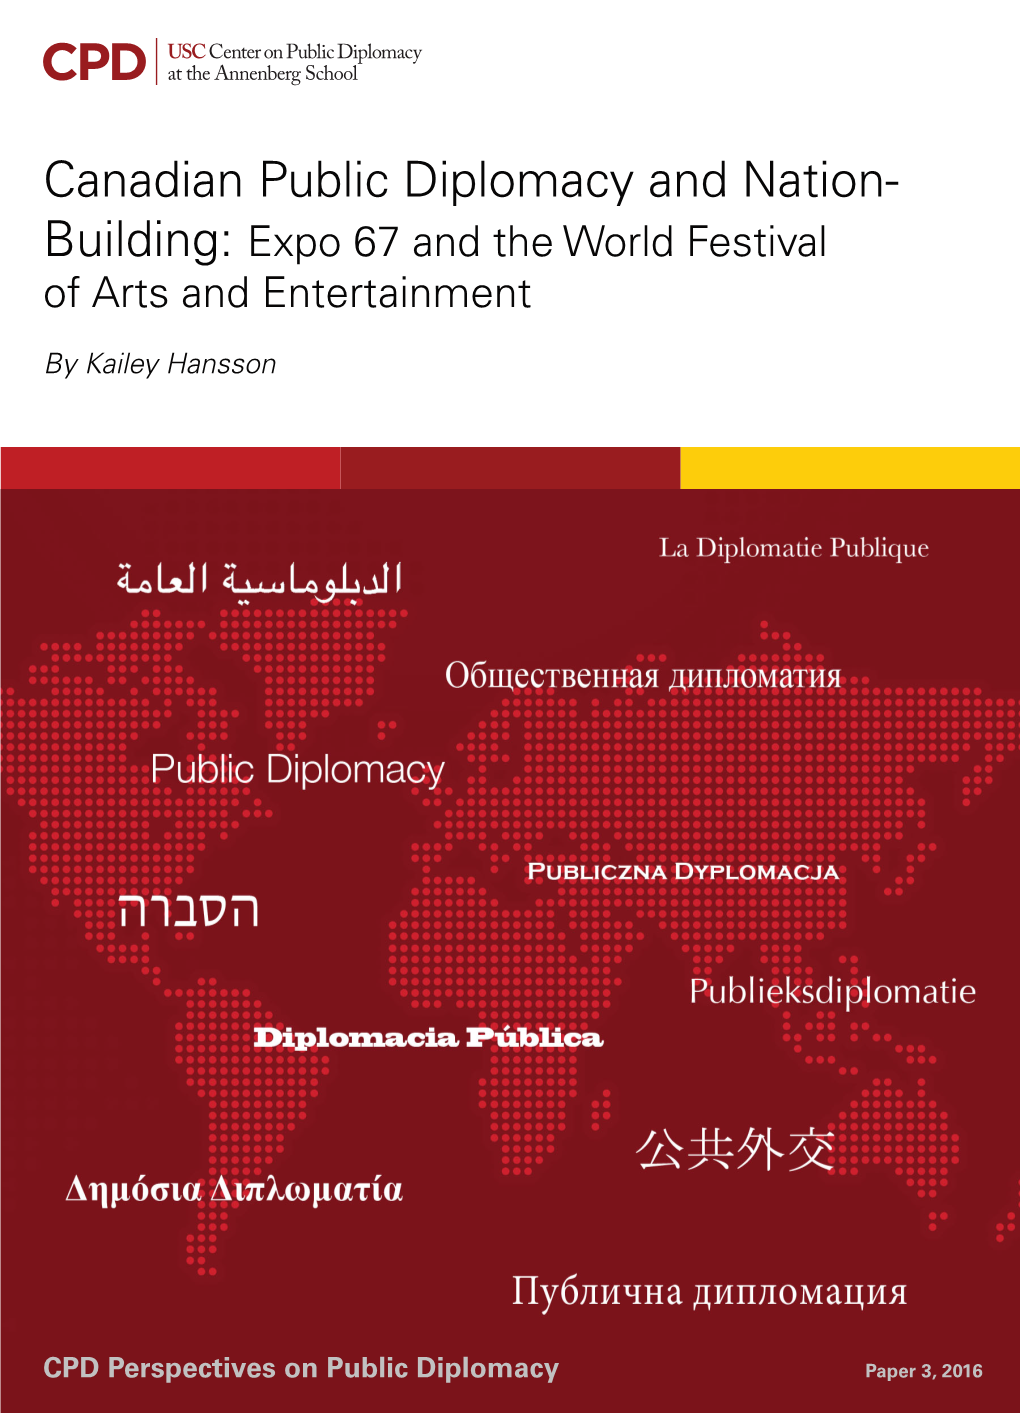 Canadian Public Diplomacy and Nation-Building: Expo 67 and the World Festival of Arts and Entertainment